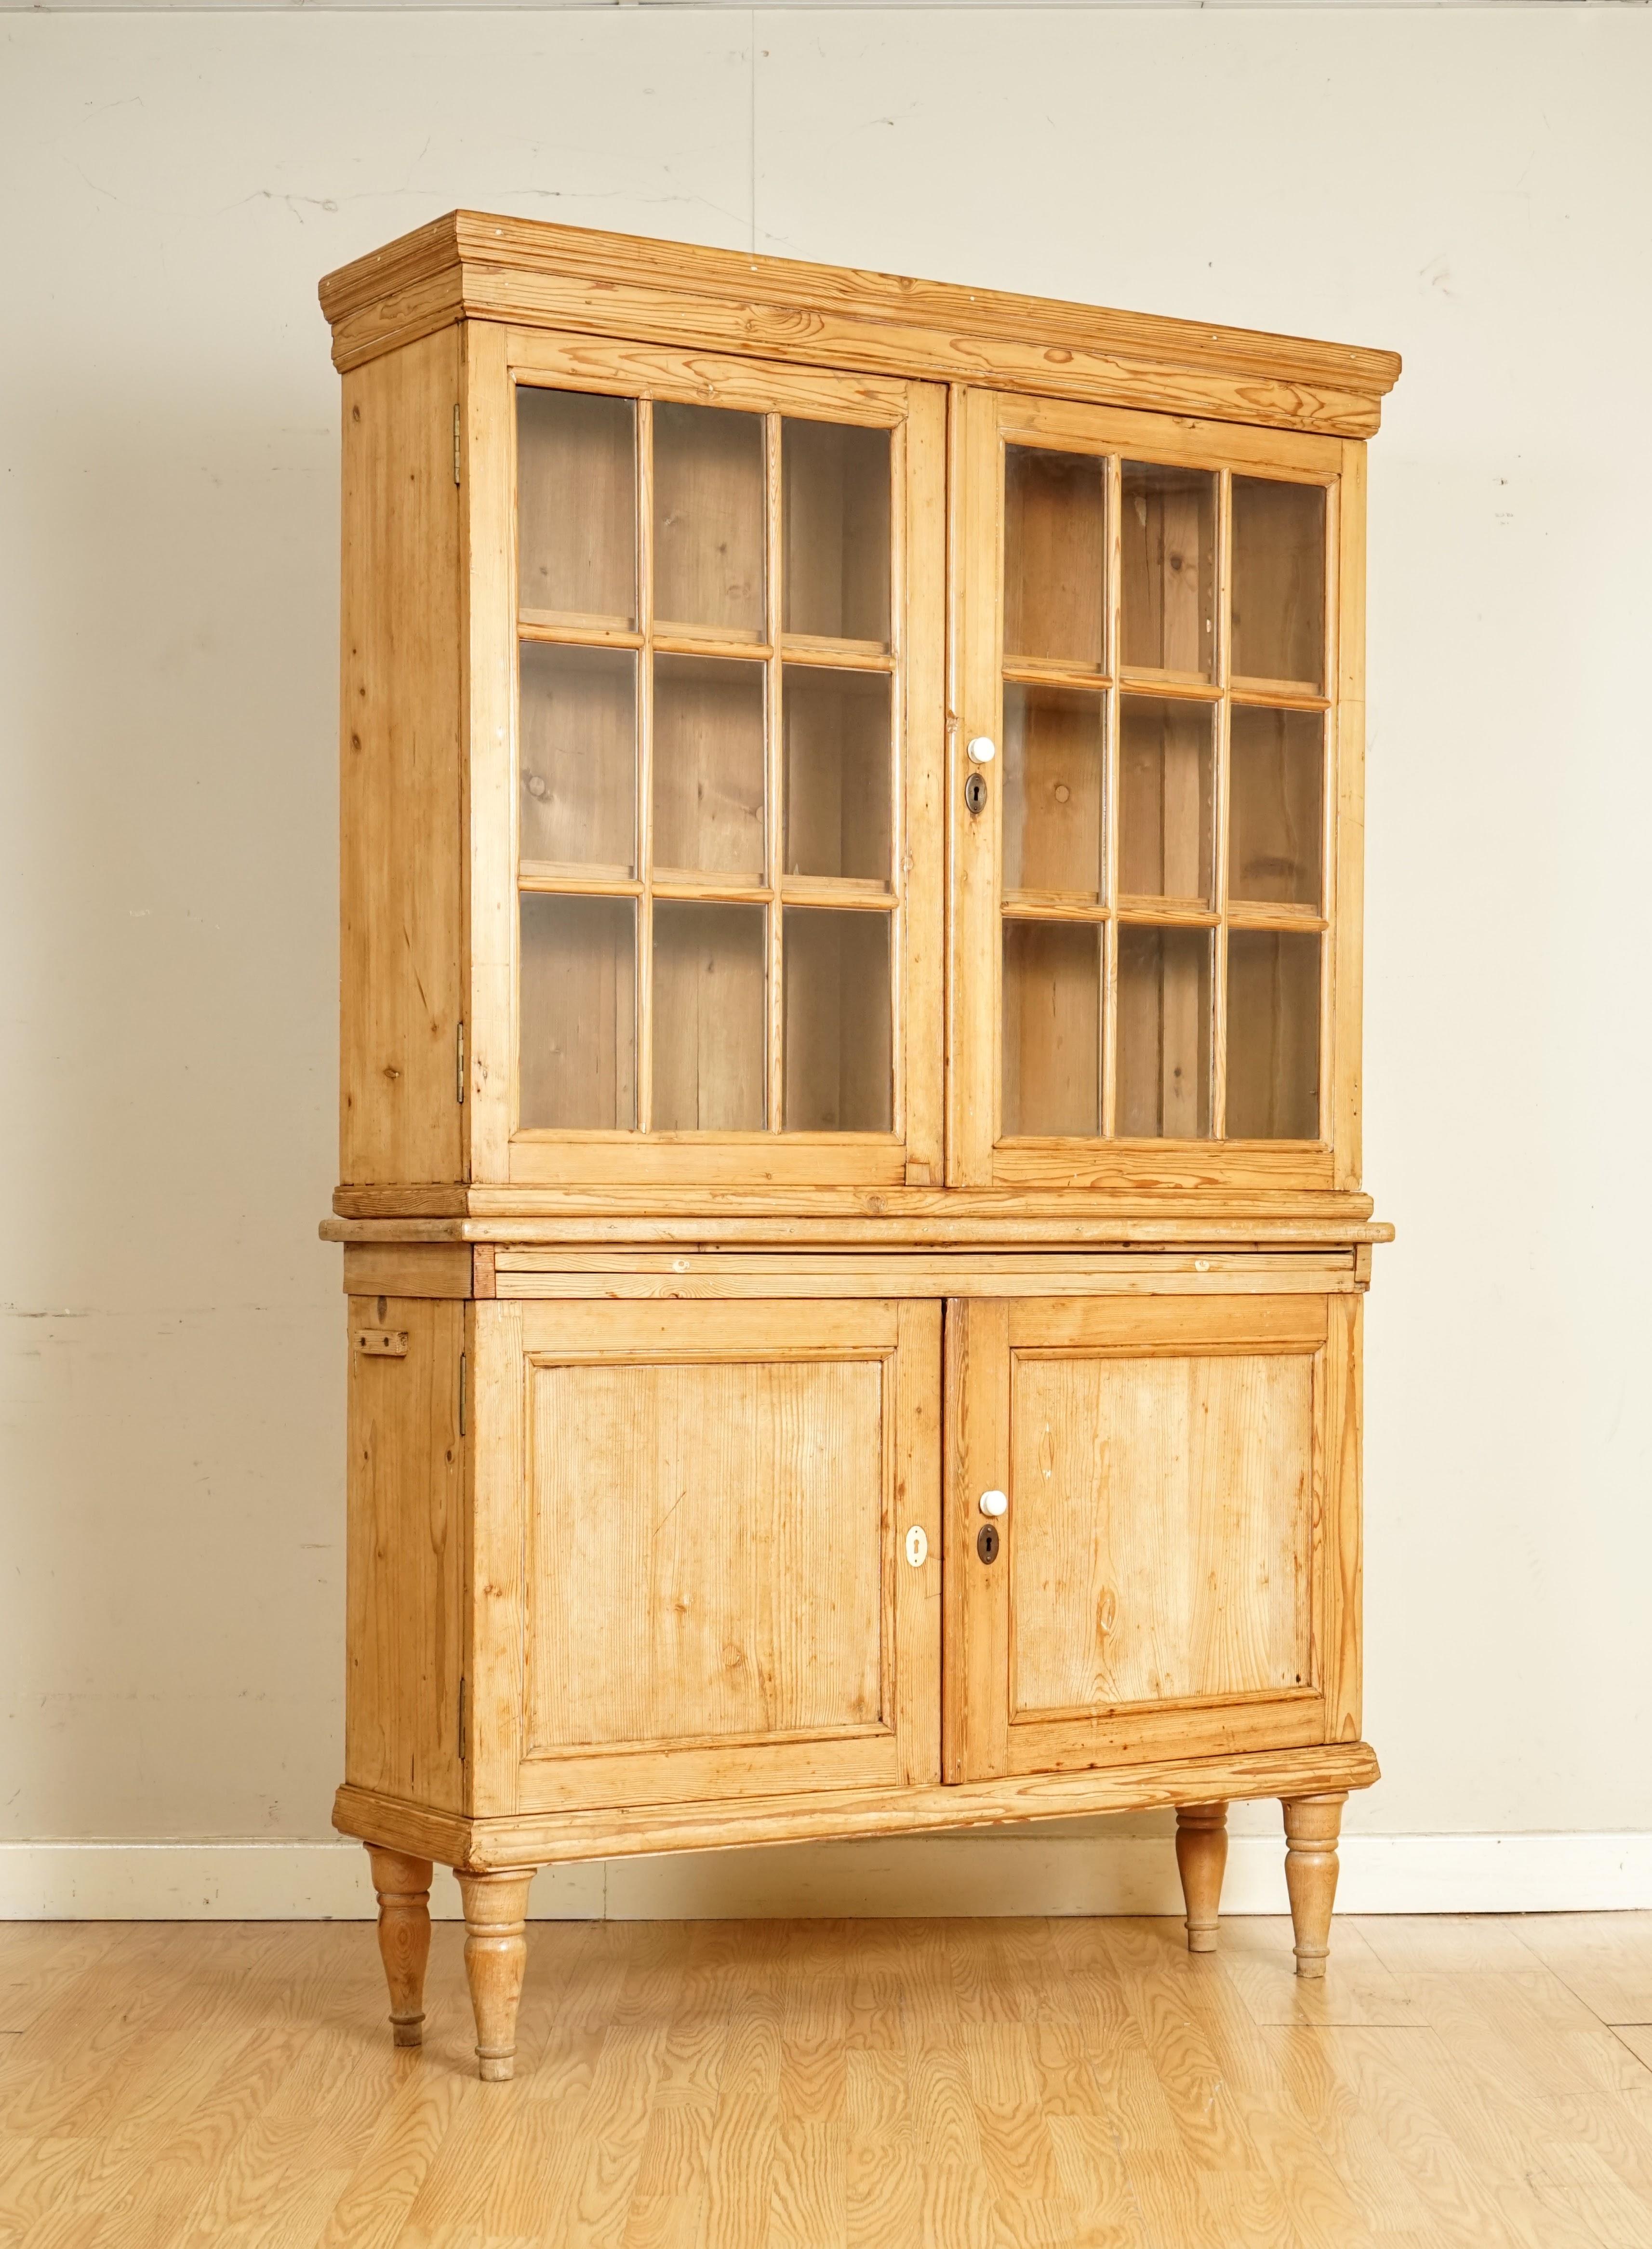 We are so excited to present to you this Lovely Unusual Distressed Farmhouse Pine Display Cabinet.

We have lightly restored this by giving it a hand clean all over, hand waxed and hand polish. 

Please carefully look at the pictures to see the